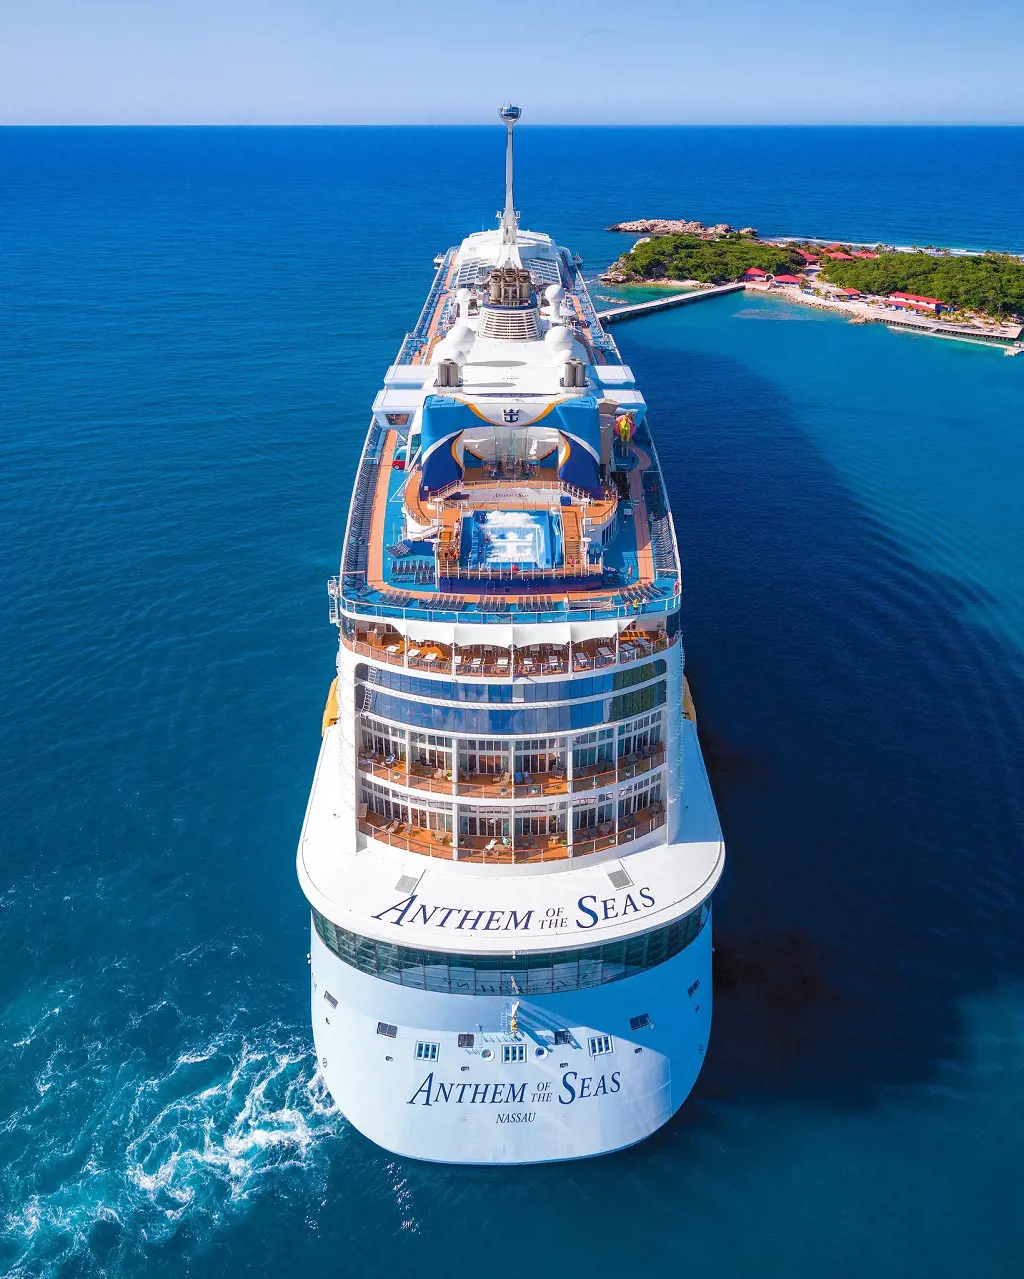 Anthem of the Seas sails under the flag of the Bahamas